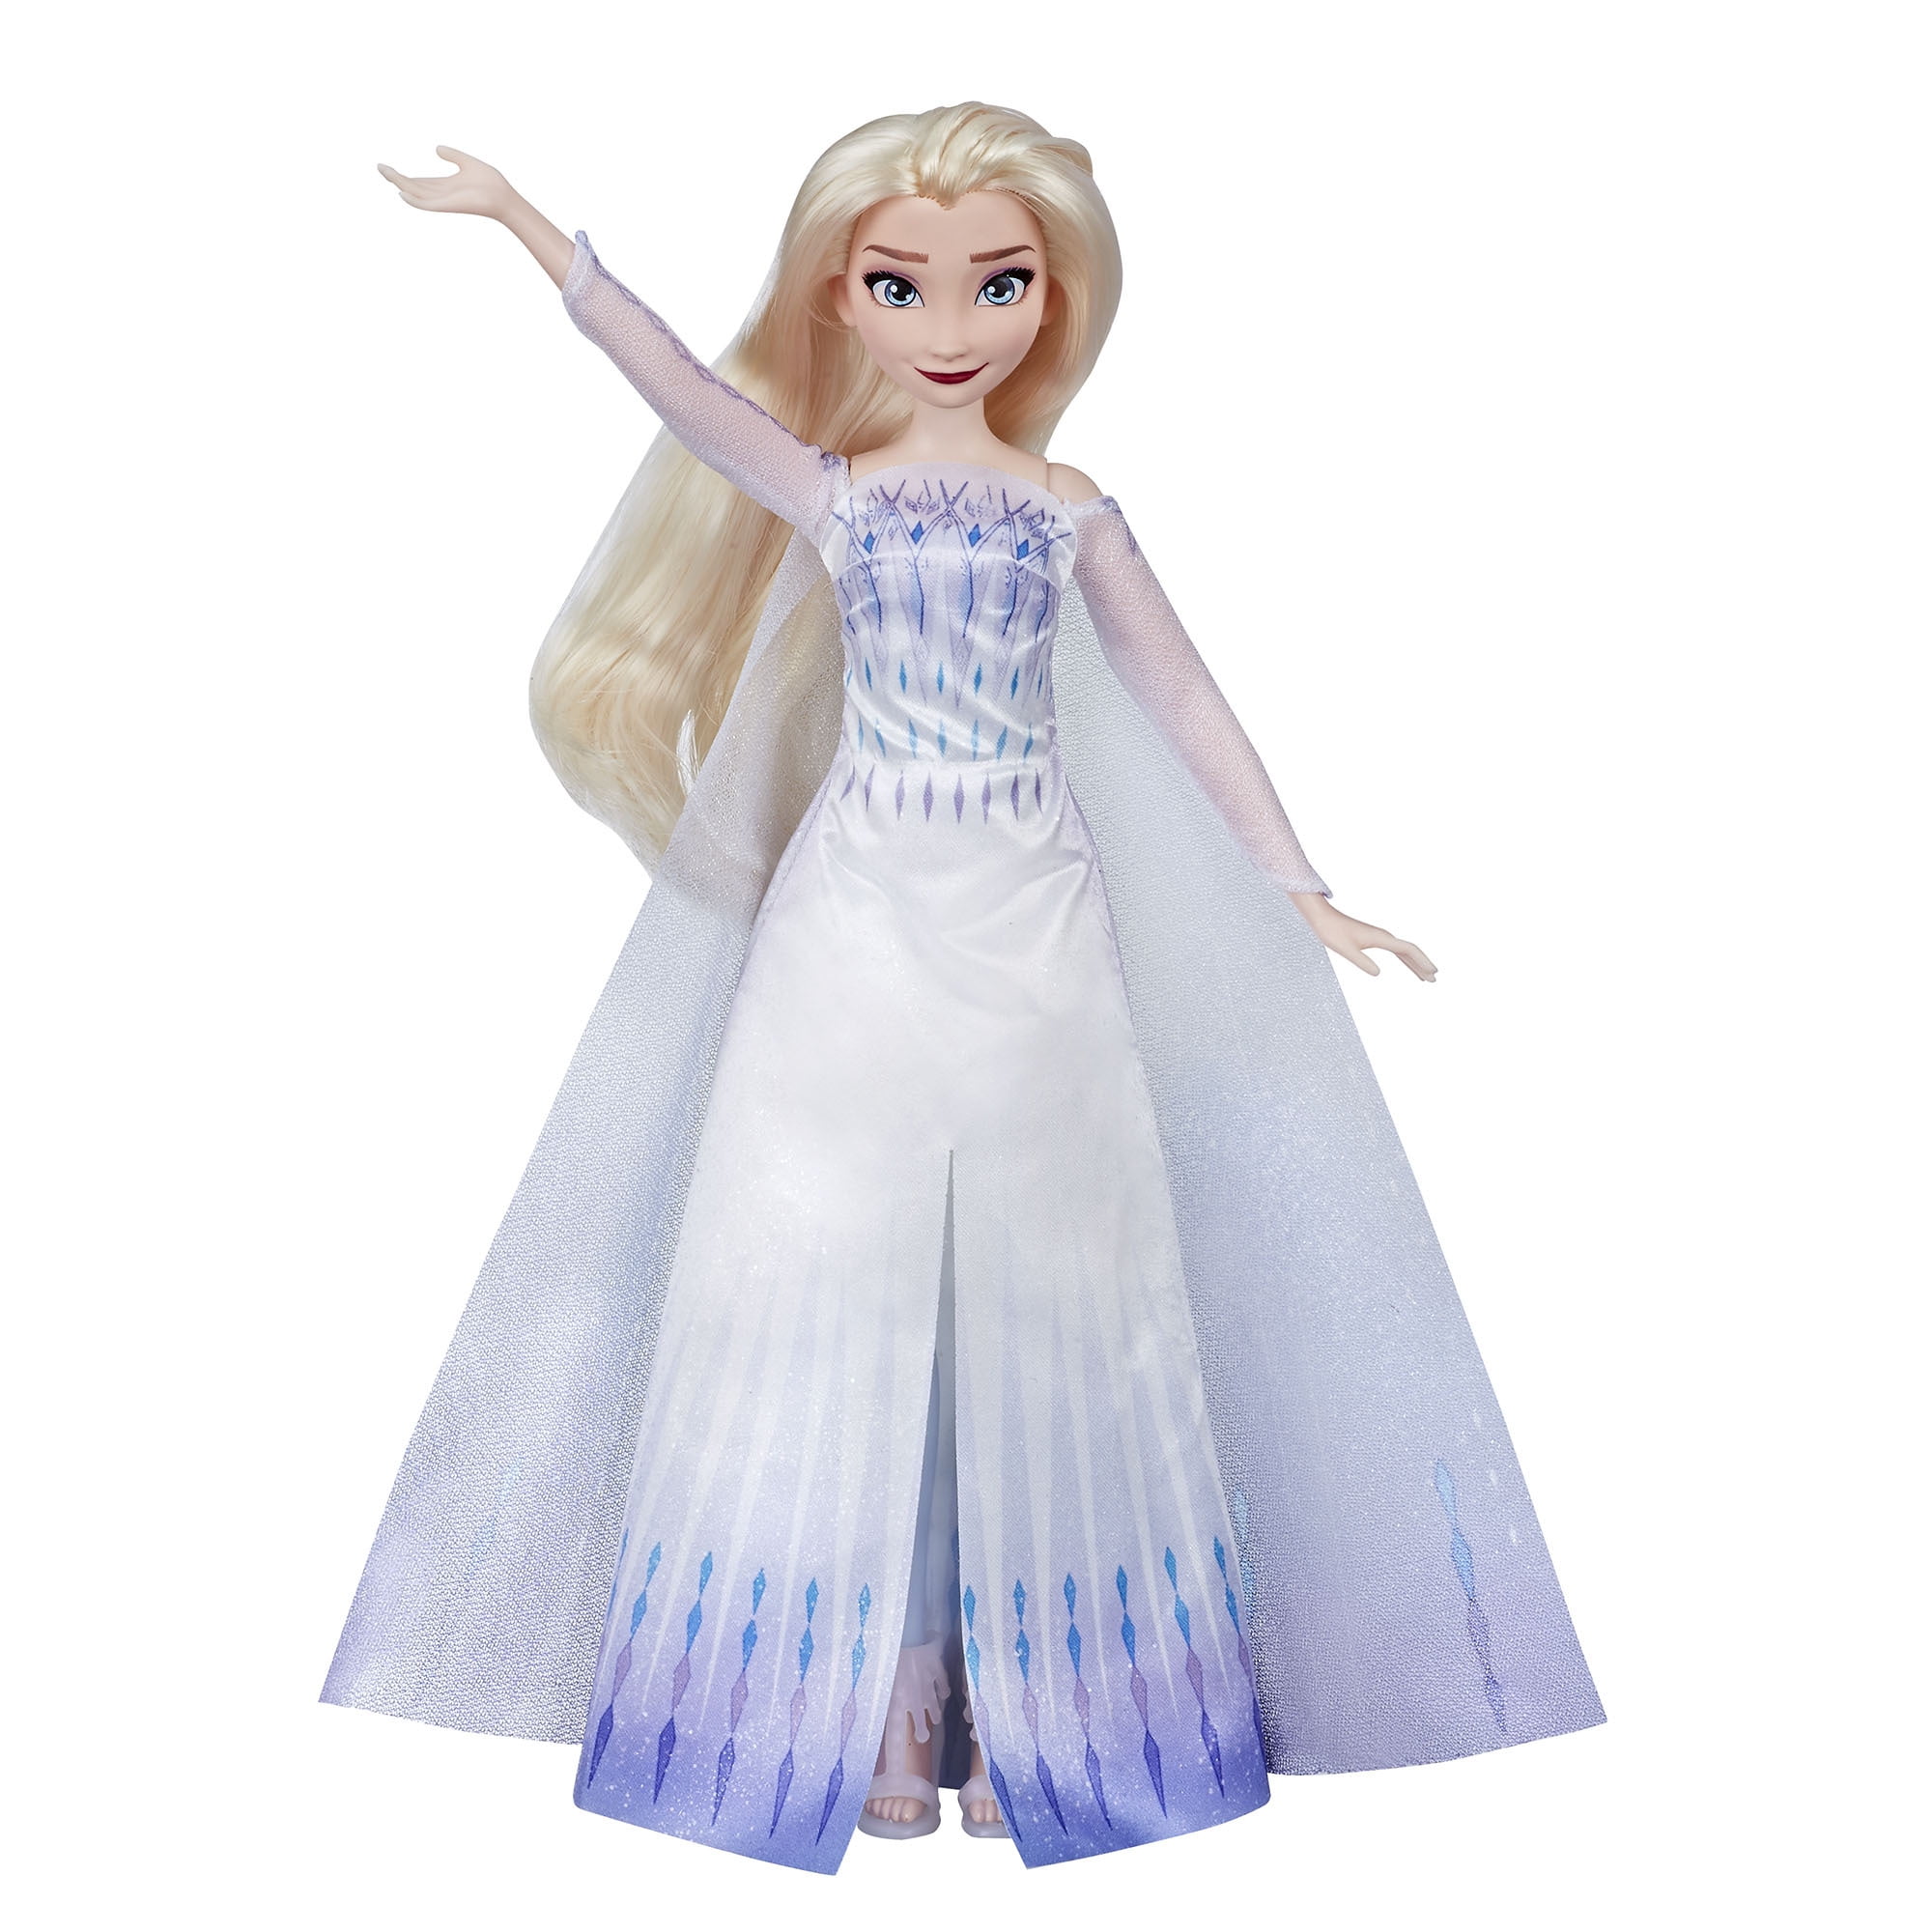 Disney Frozen Musical and Light Up Elsa Costume Size Large New Official Product